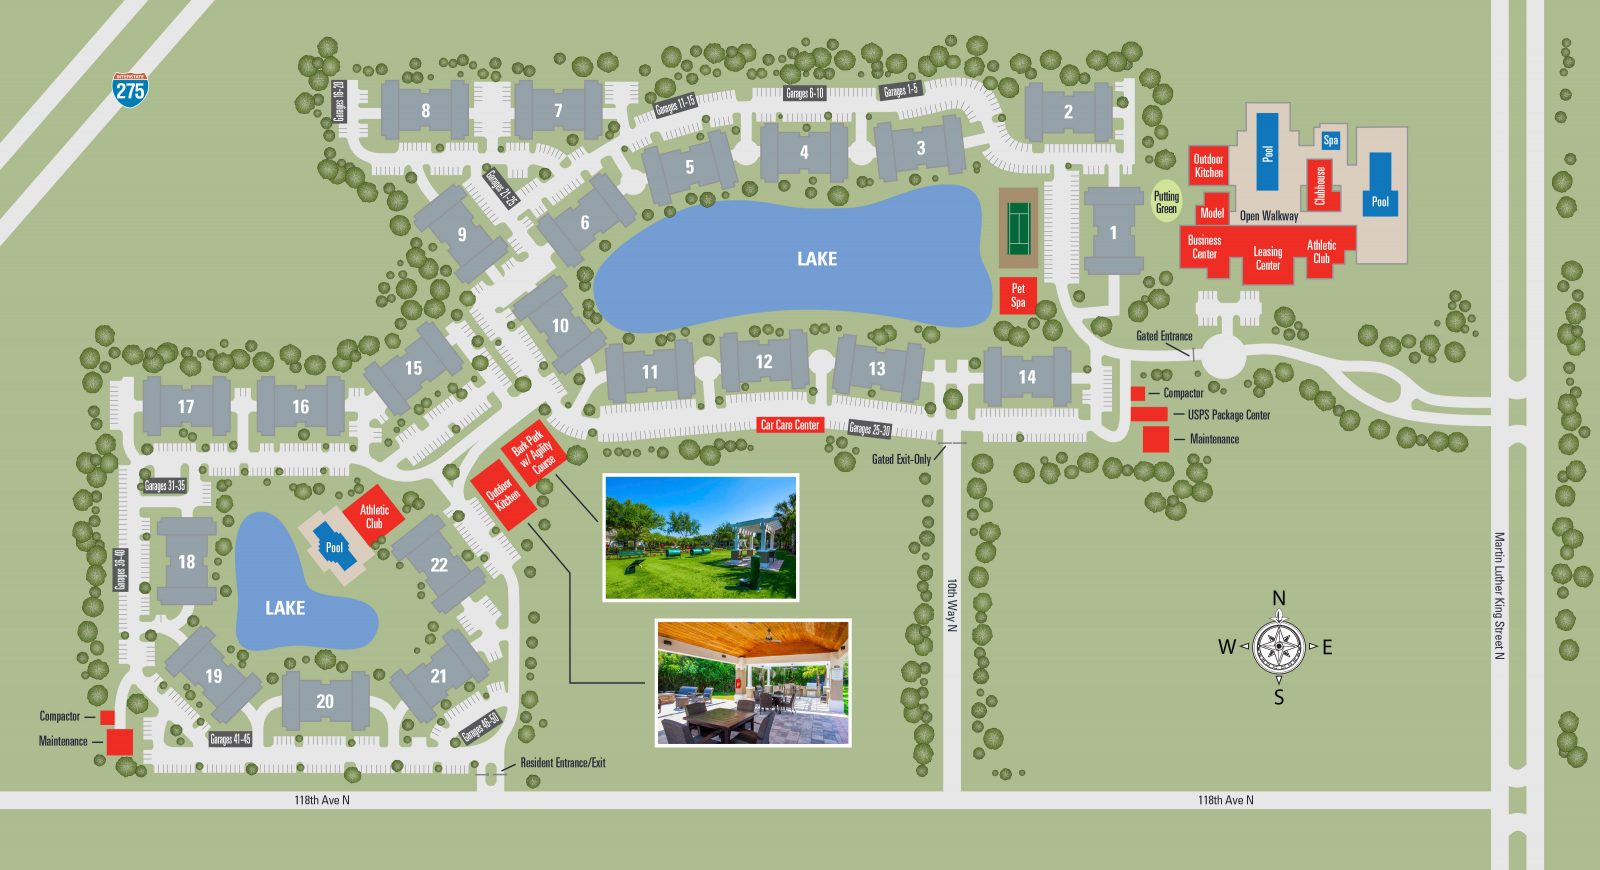 This is a community map that shows the layout of apartments for TGM Bay Isle Apartments in St Petersburg, FL.